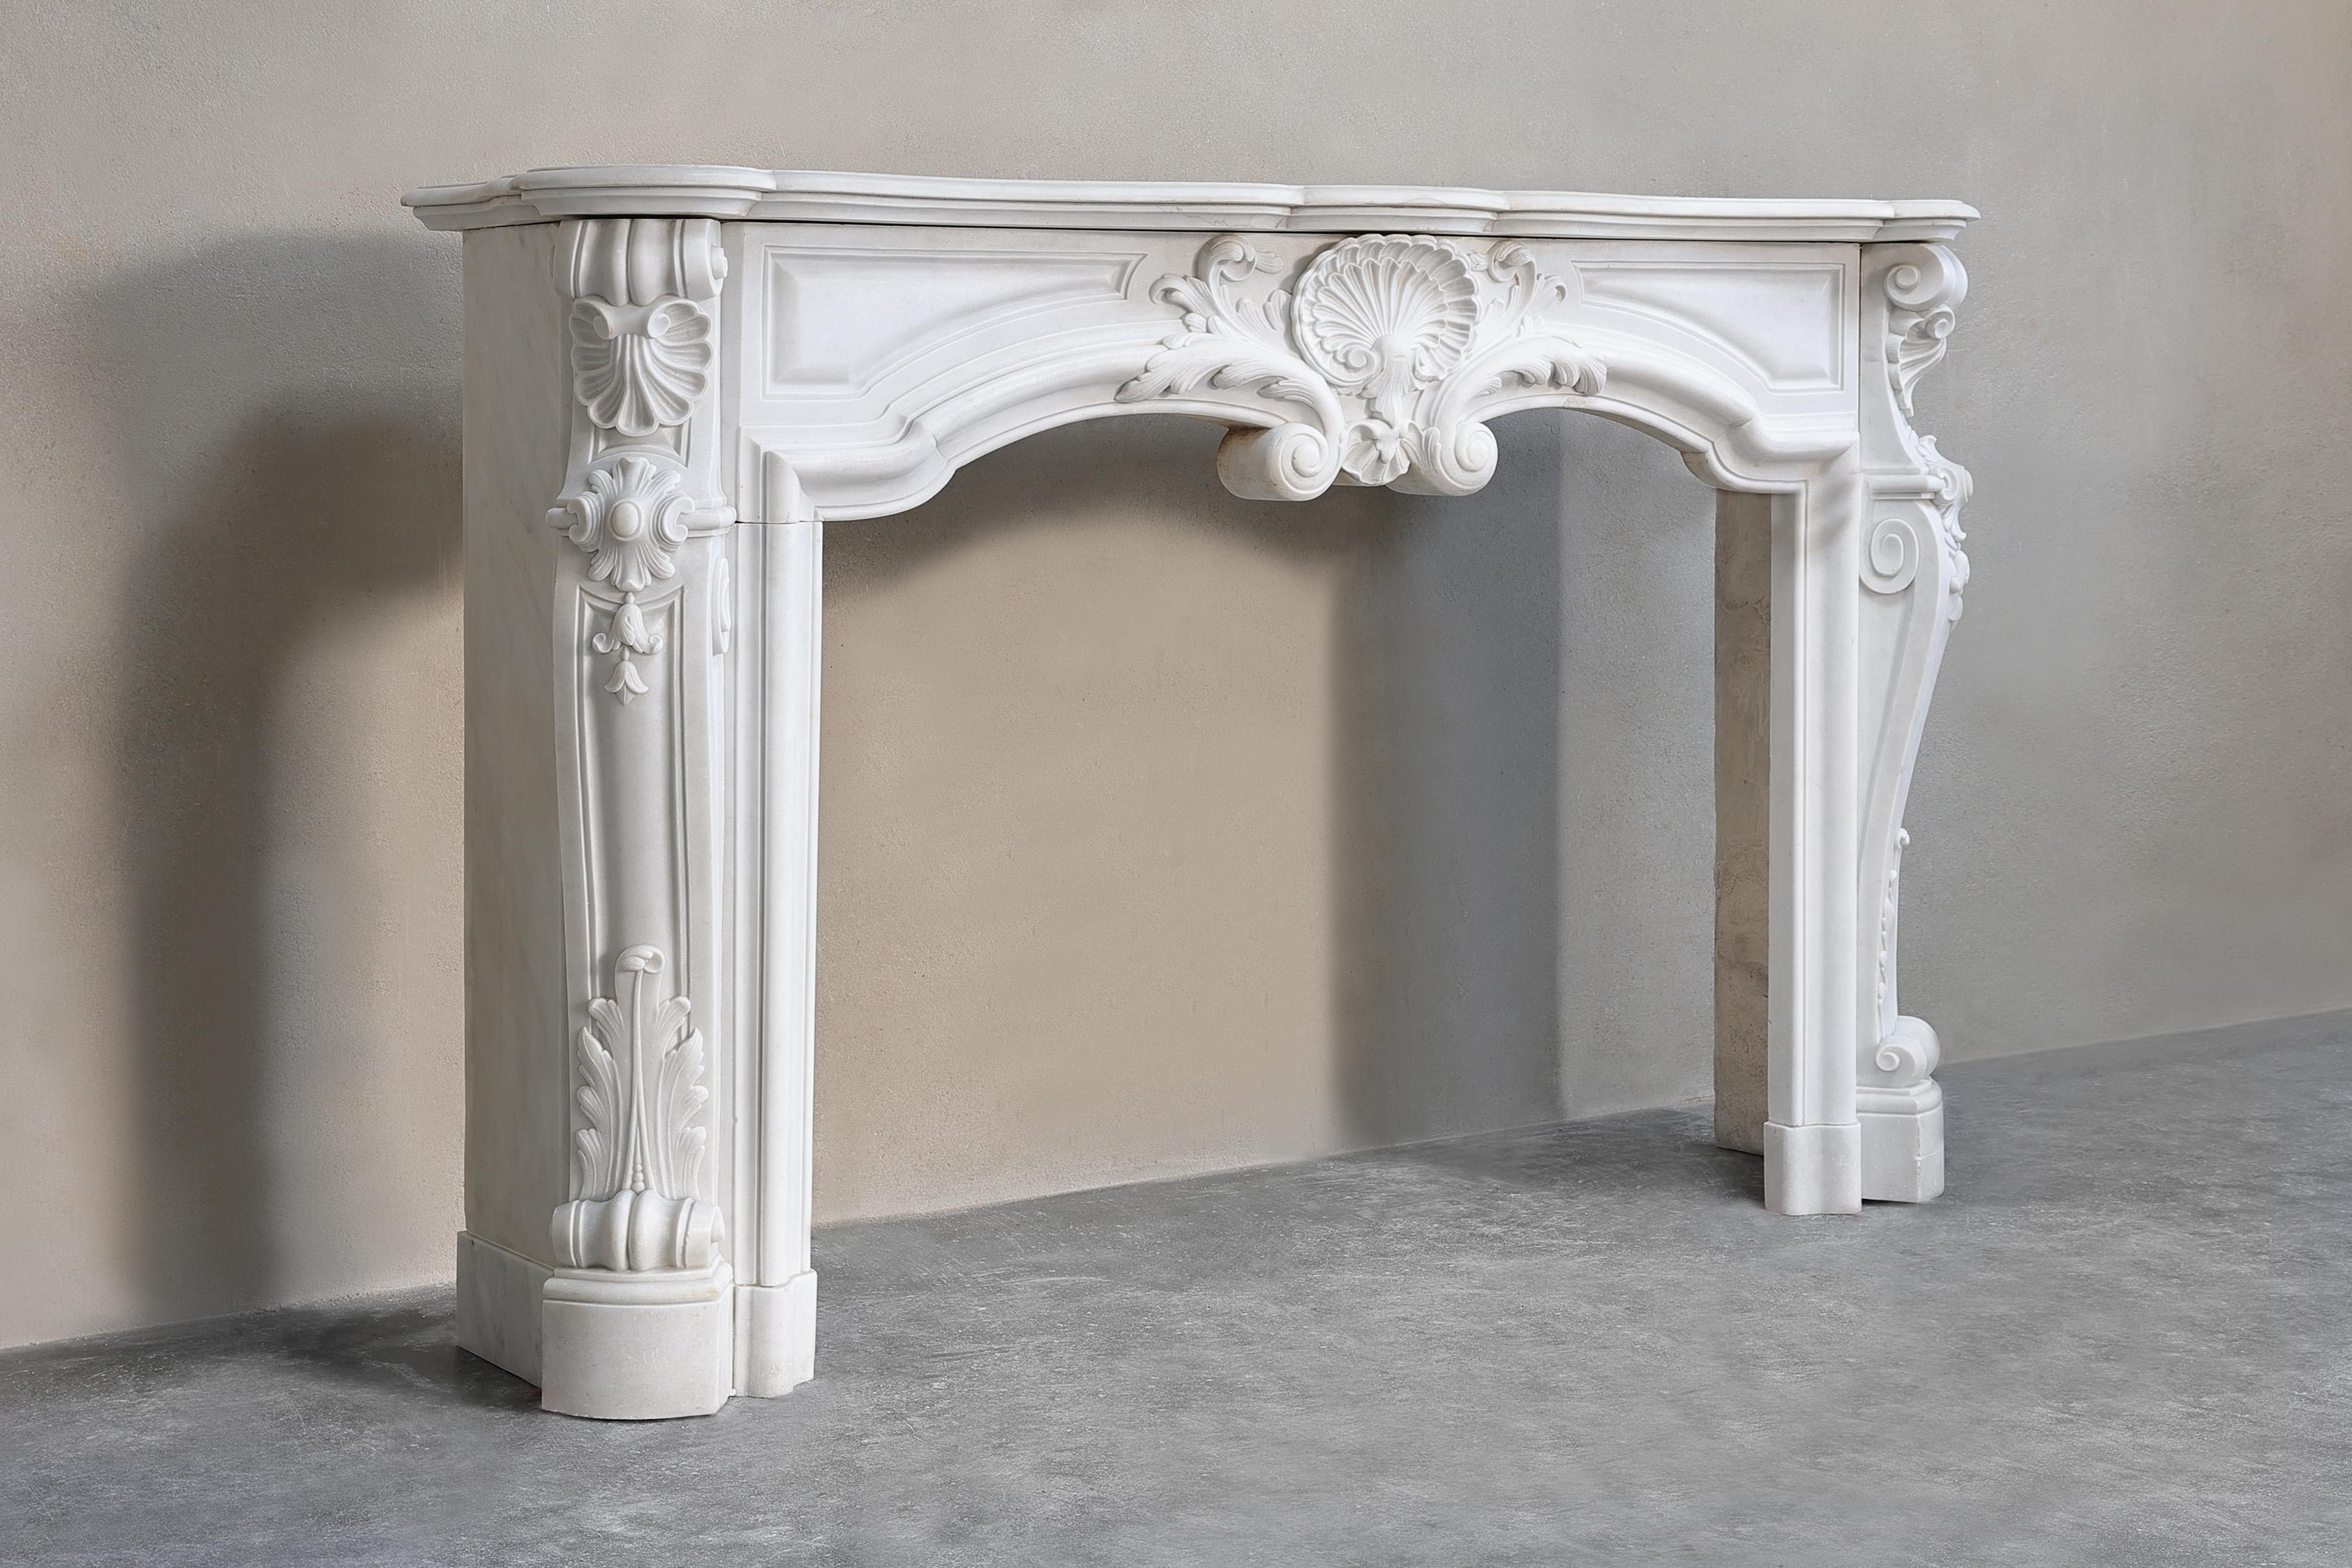 Beautiful elegant antique marble mantelpiece of Carrara marble in style of Louis XV with graceful elements such as a scallop in the middle of the front part and on the sides, acanthus leaves and beautiful lines. A very beautiful antique fireplace in